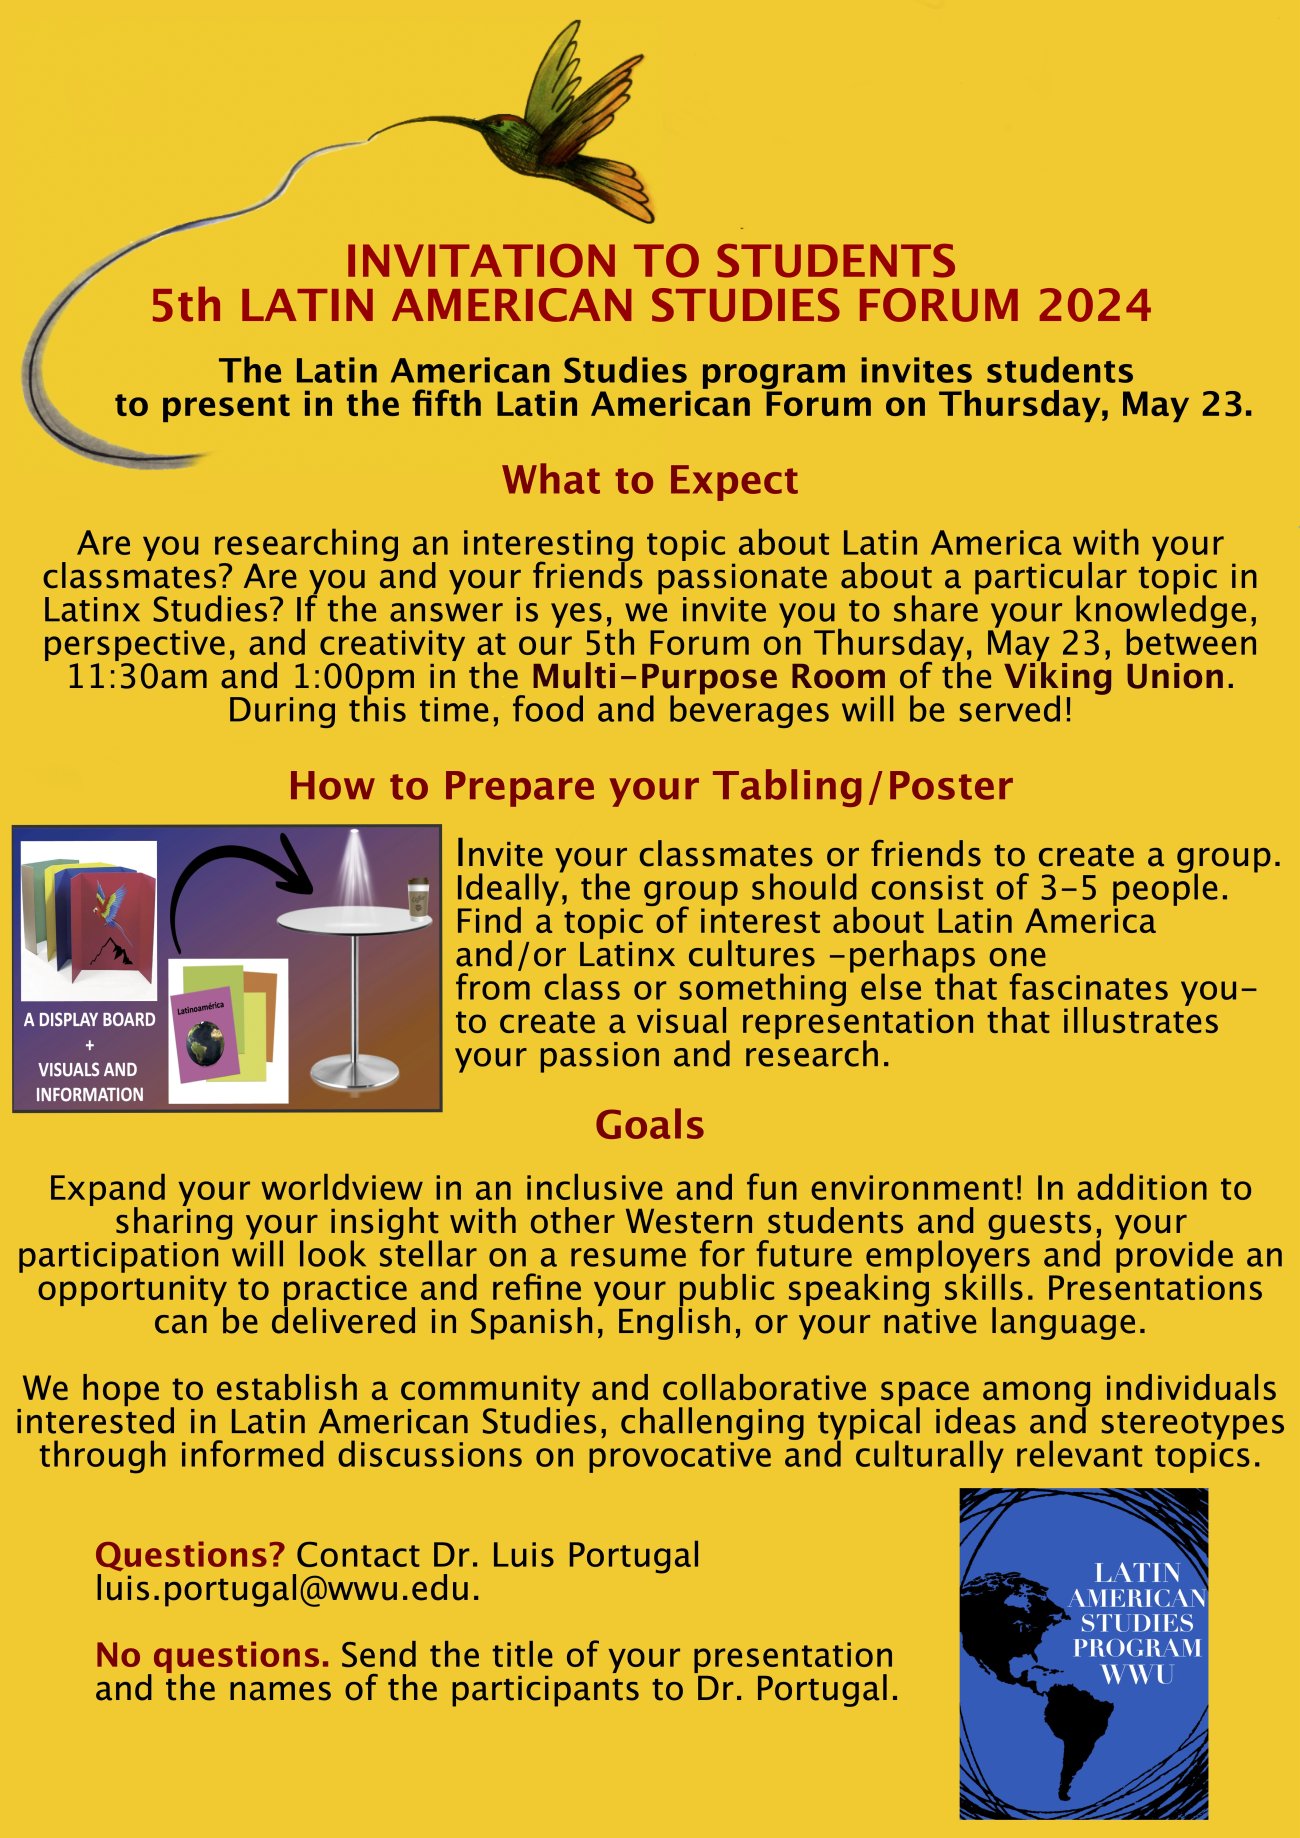 INVITATION TO STUDENTS 5th LATIN AMERICAN STUDIES FORUM 2024 The Latin American Studies program invites students to present in the fifth Latin American Forum on Thursday, May 23.